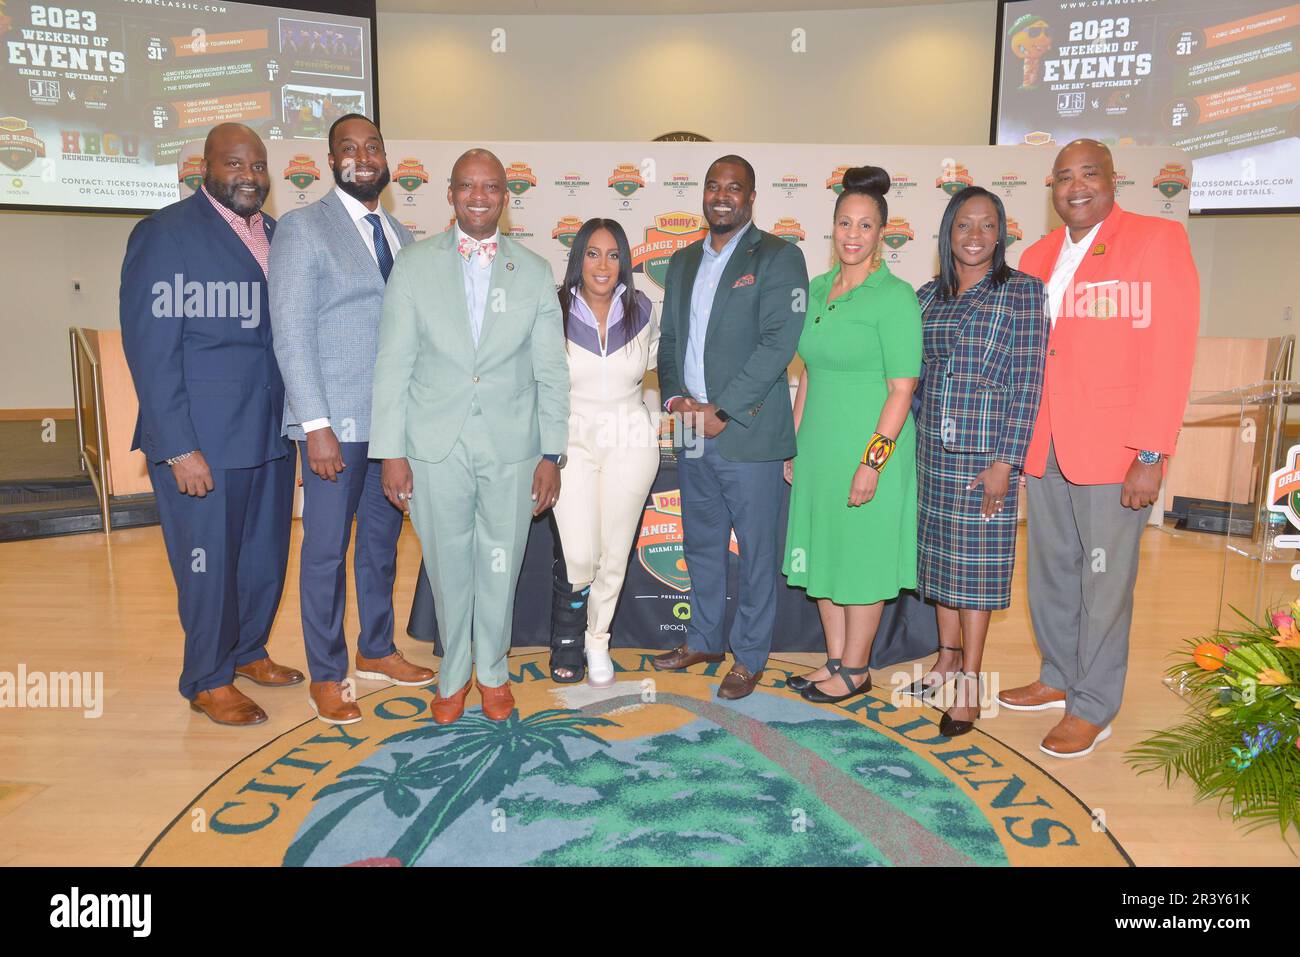 MIAMI GARDENS, FLORIDA - MAY 23: T.C. Taylor, Head Coach, Jackson State University, Oliver Gilbert III, Miami-Dade County Commissioner, Kendra N. Bulluck, Executive Director, Orange Blossom Classic Committee, Willie Simmons, Head Coach Florida A&M University, Connie Kinnard, head of the Multicultural Tourism and Development Department (MTDD) at the Greater Miami Convention & Visitors Bureau, Angela Adams Suggs, President & CEO, Florida Sports Foundation and Curtis E. Johnson, Jr., president of the Florida A&M University (FAMU) National Alumni Association attend the Orange Blossom Classic 2023 Stock Photo